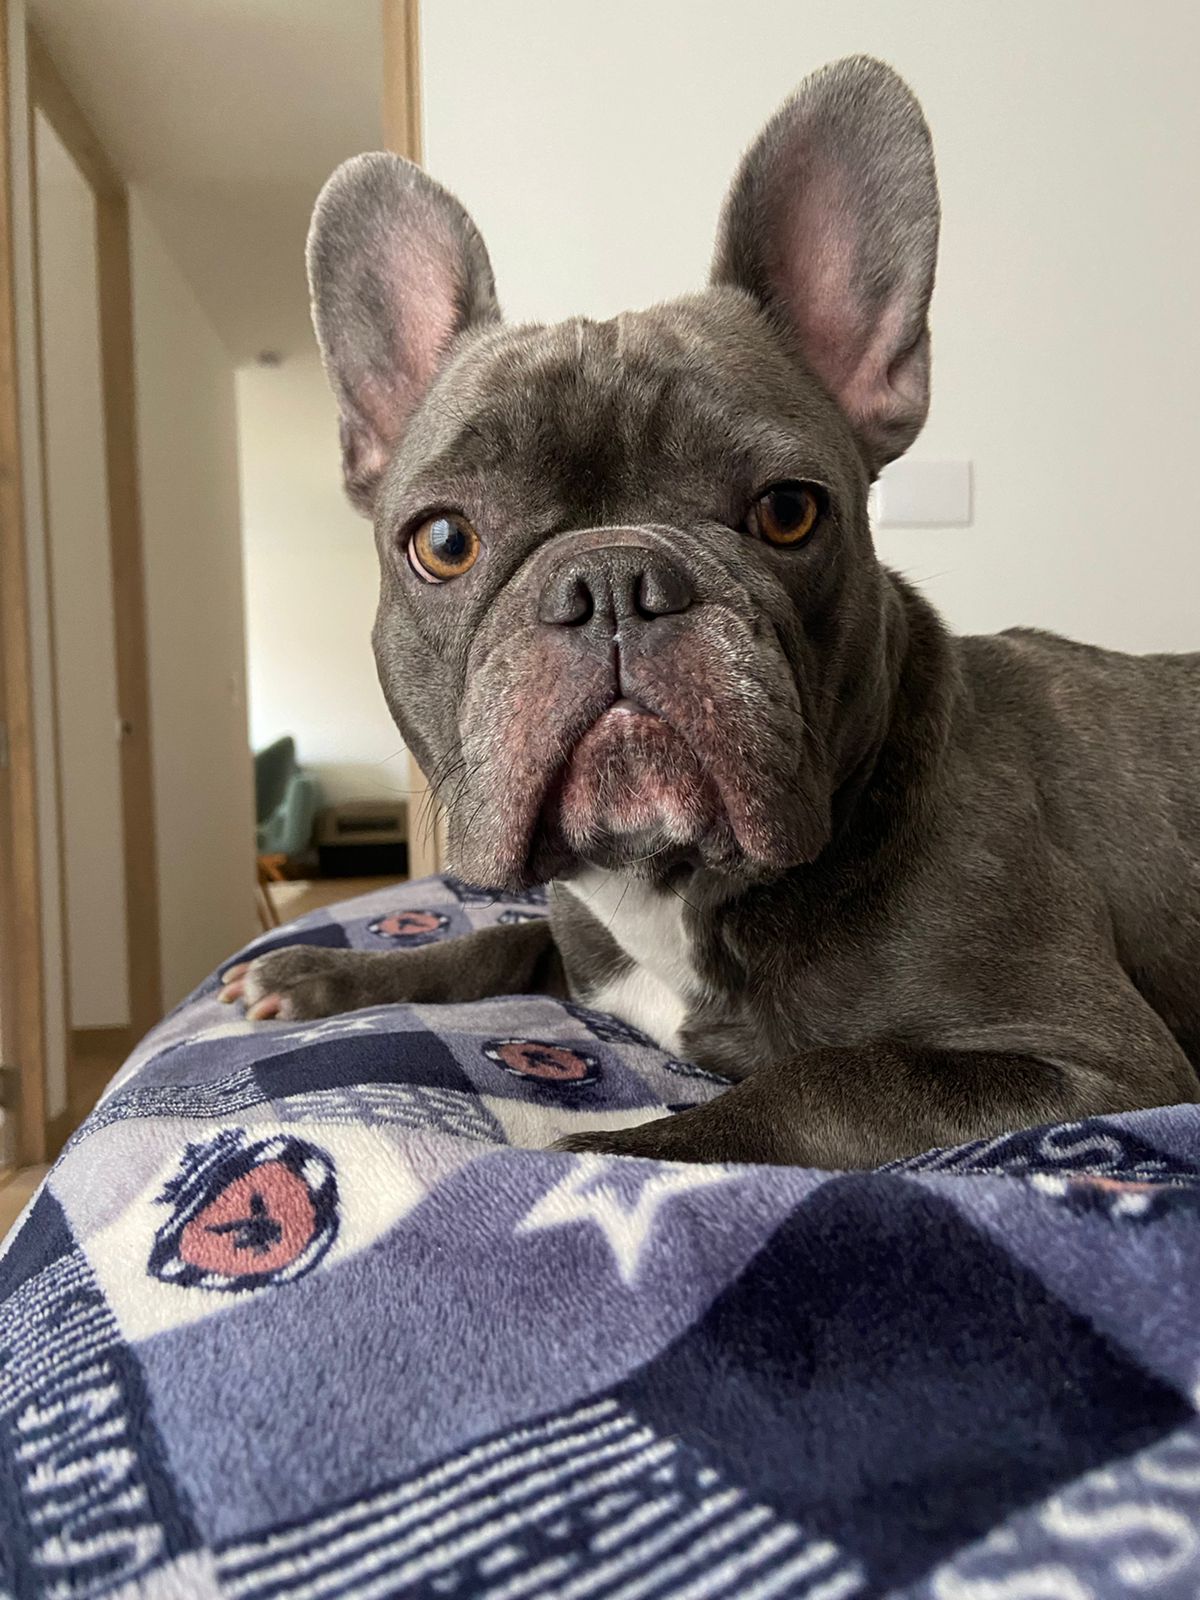 French Bulldog from Merzenich, Germany to San José, Costa Rica, snub-nosed dogs shipping by cargo